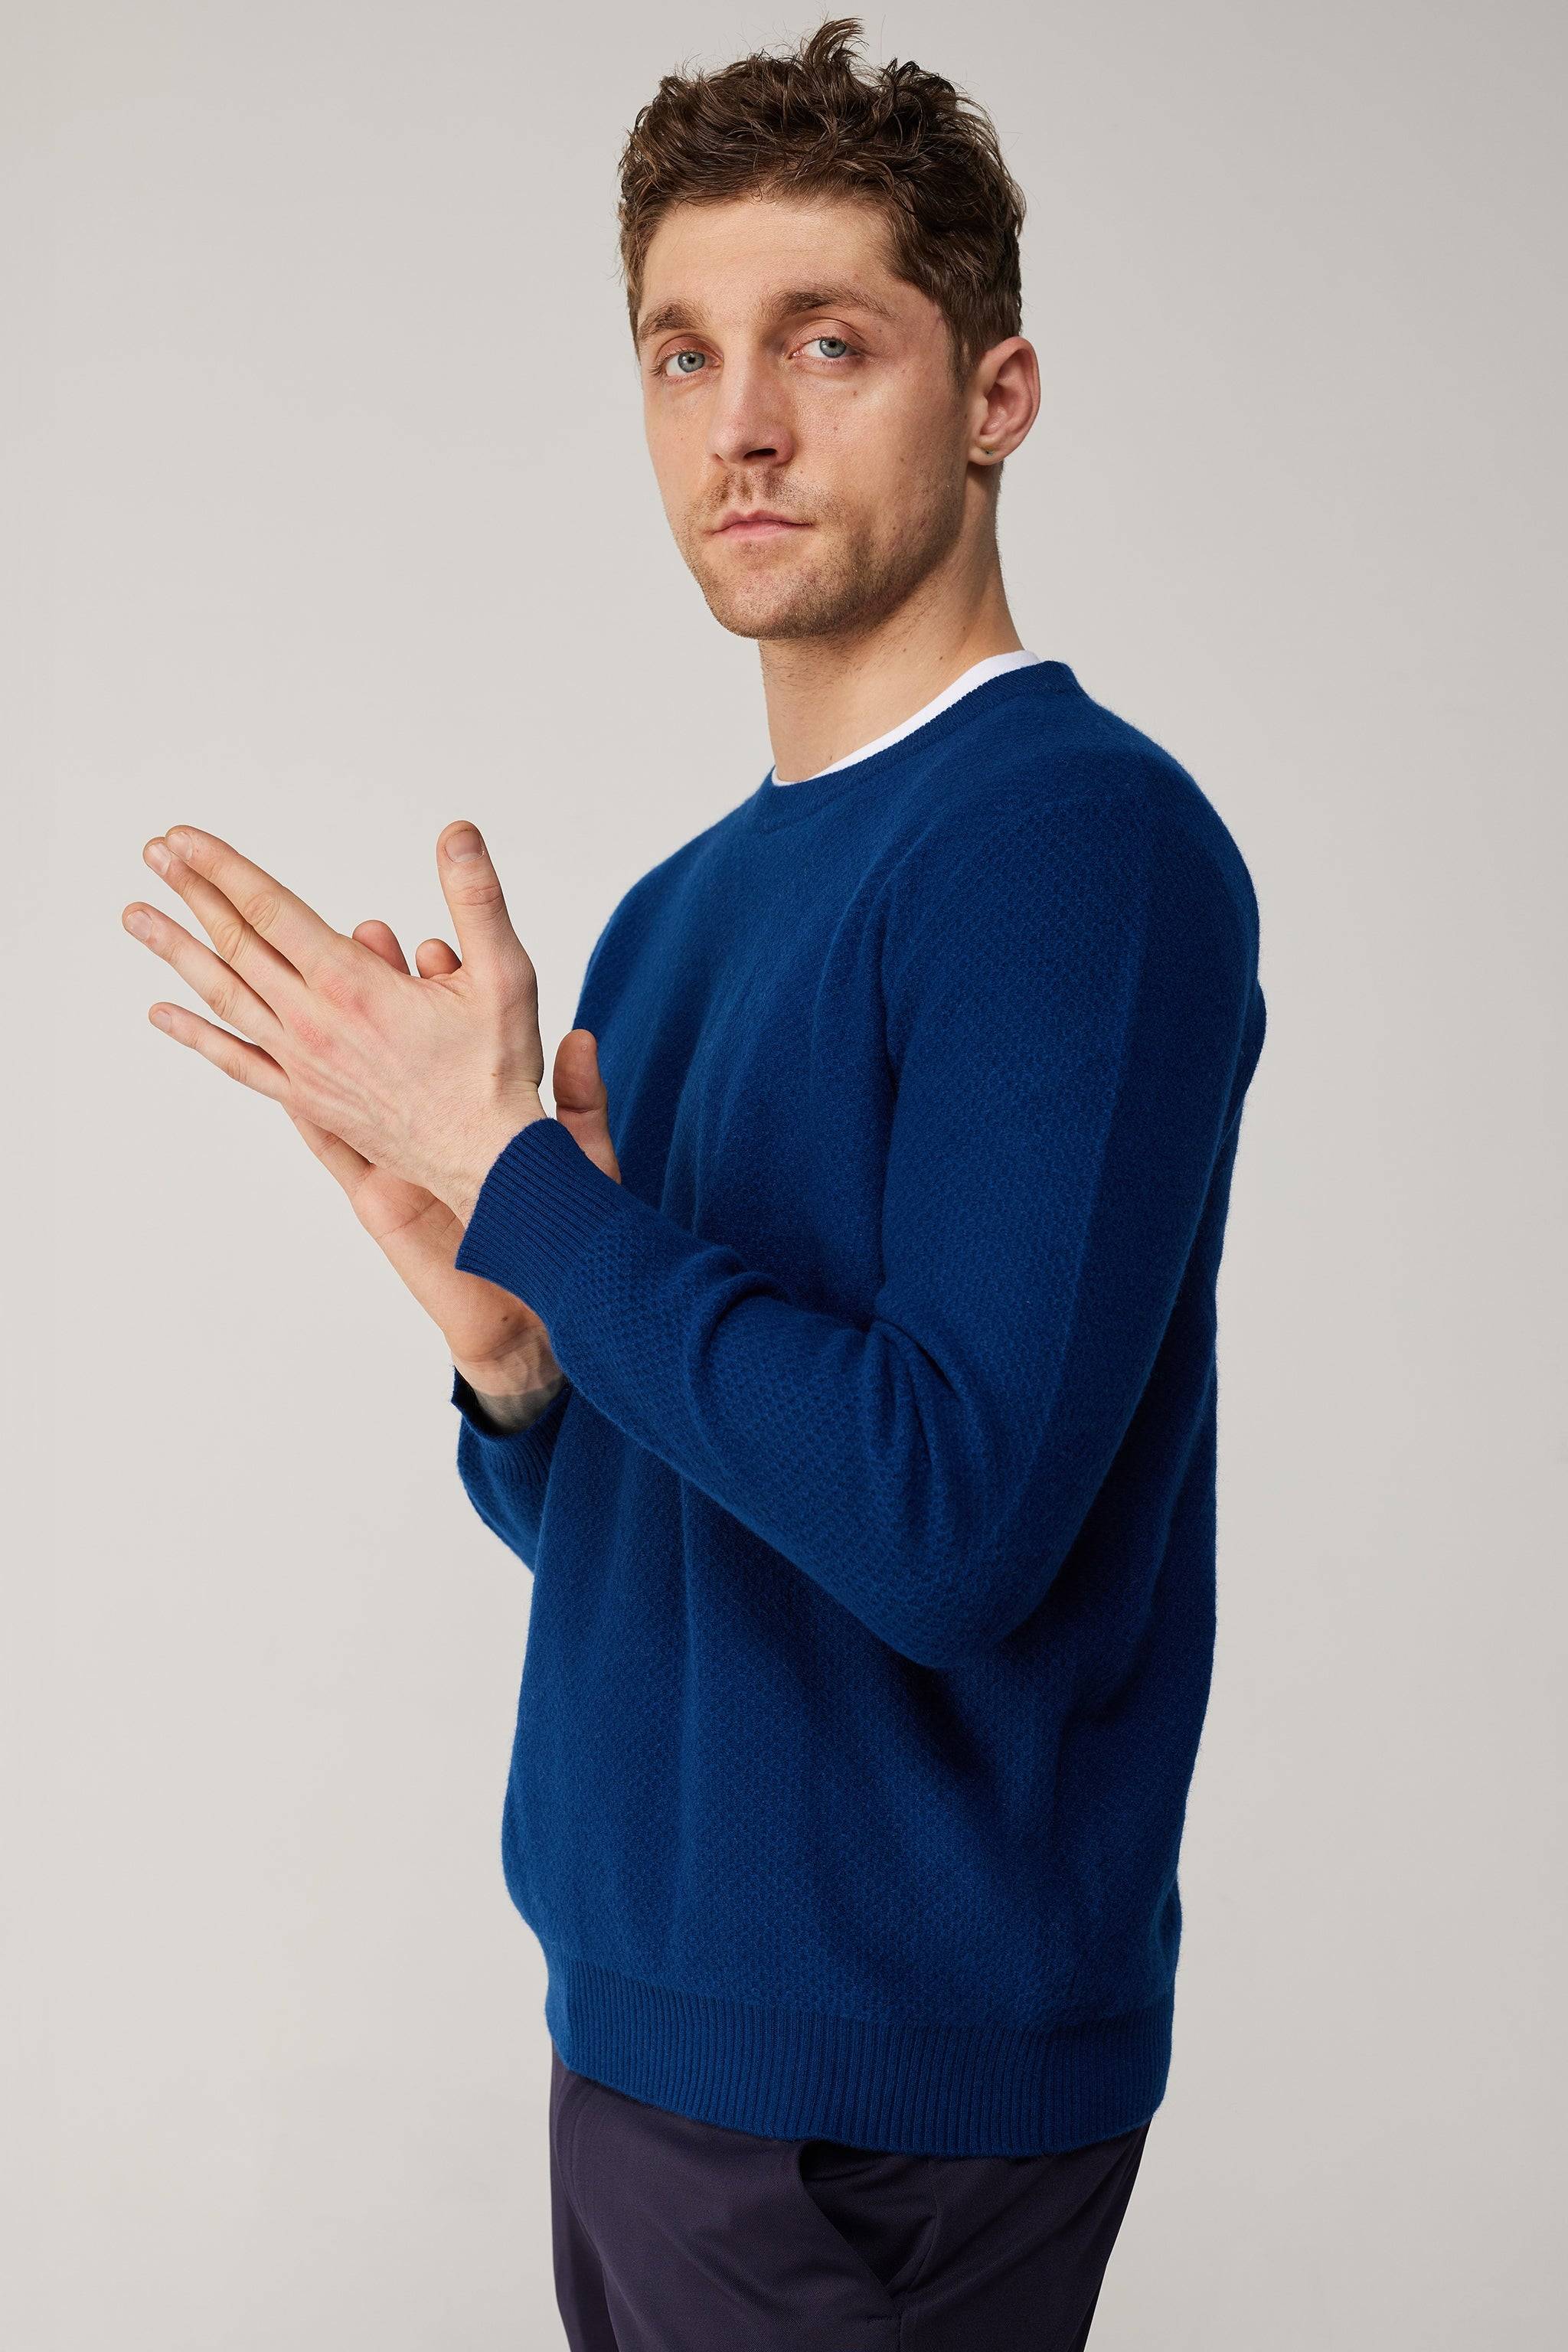 a man in a blue sweater is holding his hands together